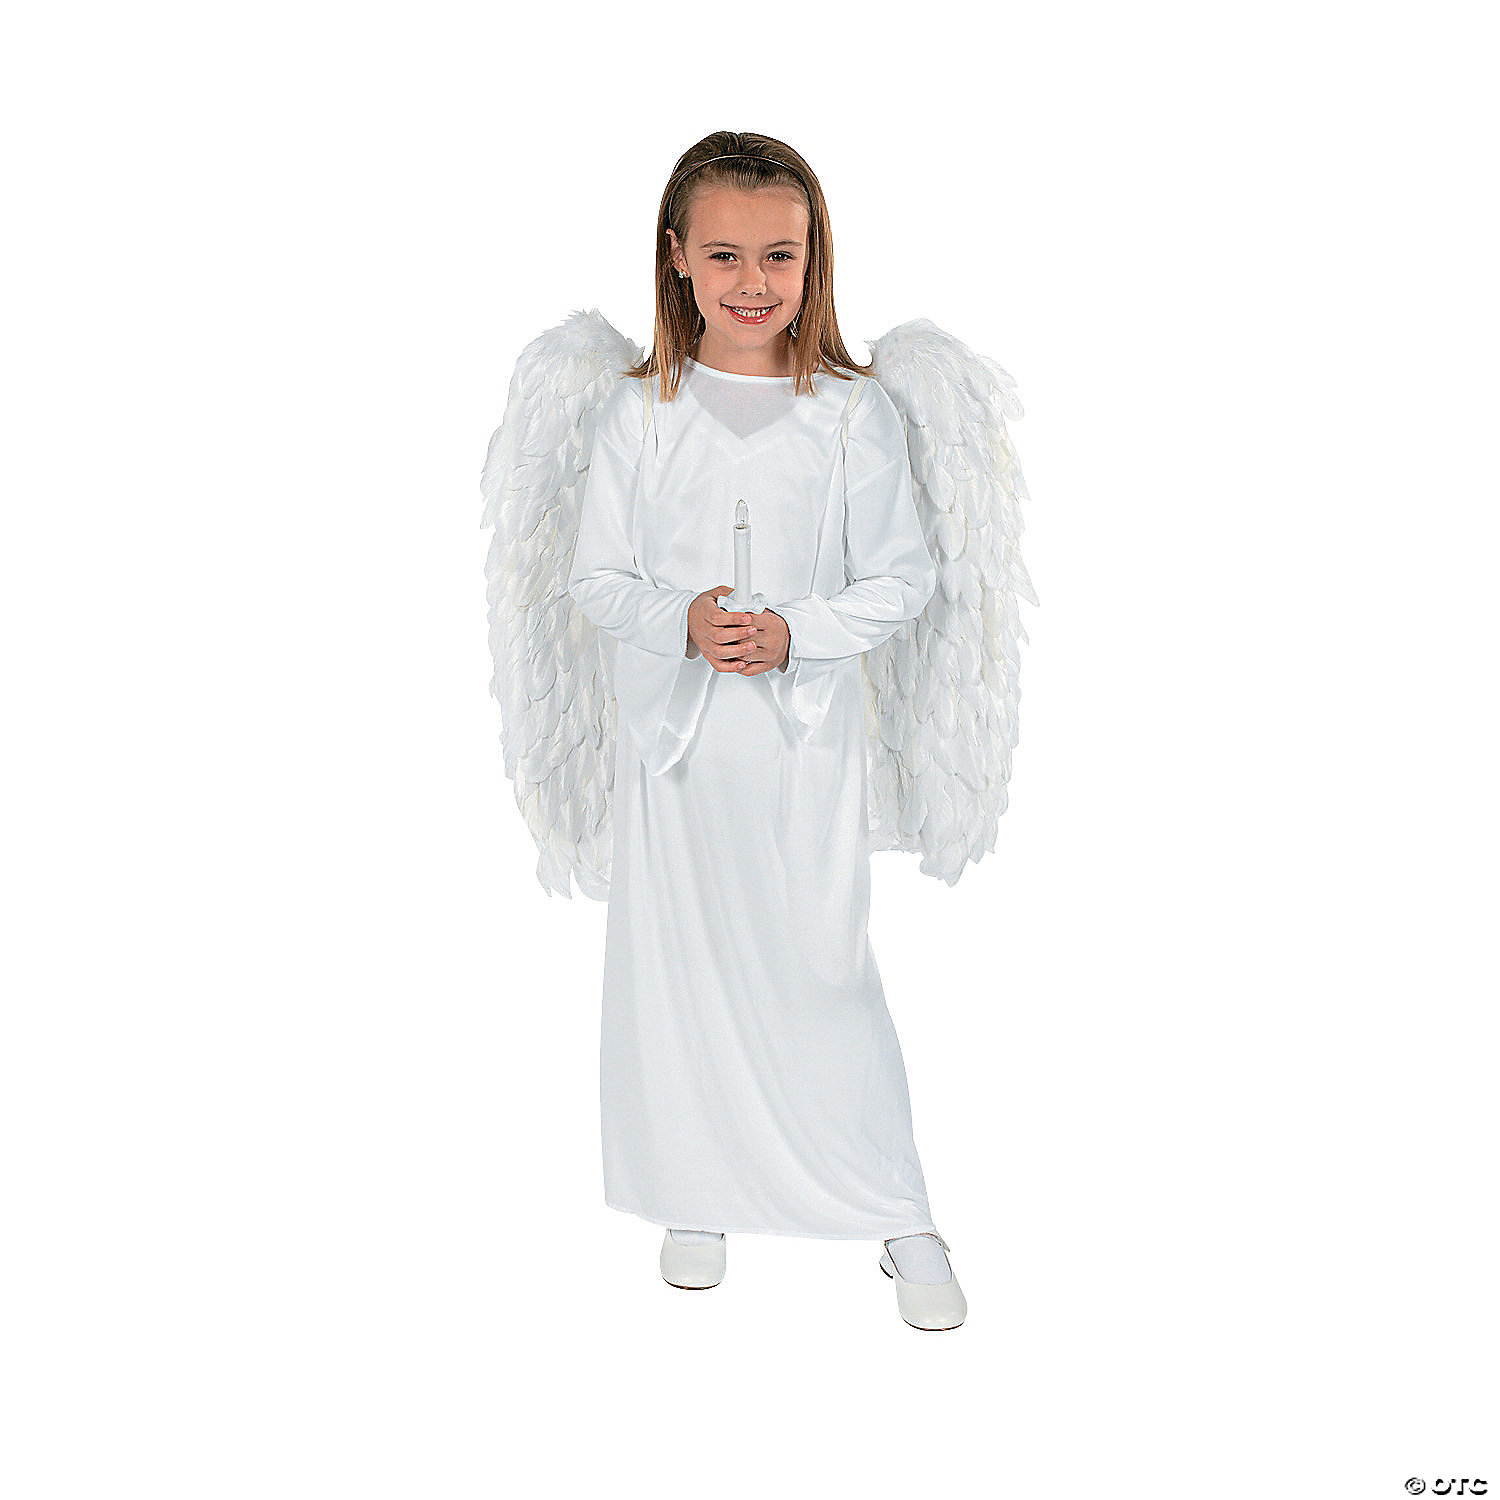 Angel Wings Angel Halo Kids Angel Wings and Halo White Angel Wings for Kids Angel Costumes for Girls Boys Child Feather Wings Halloween Christmas Angel Costume Wings Angel Wings & Headband Halo 